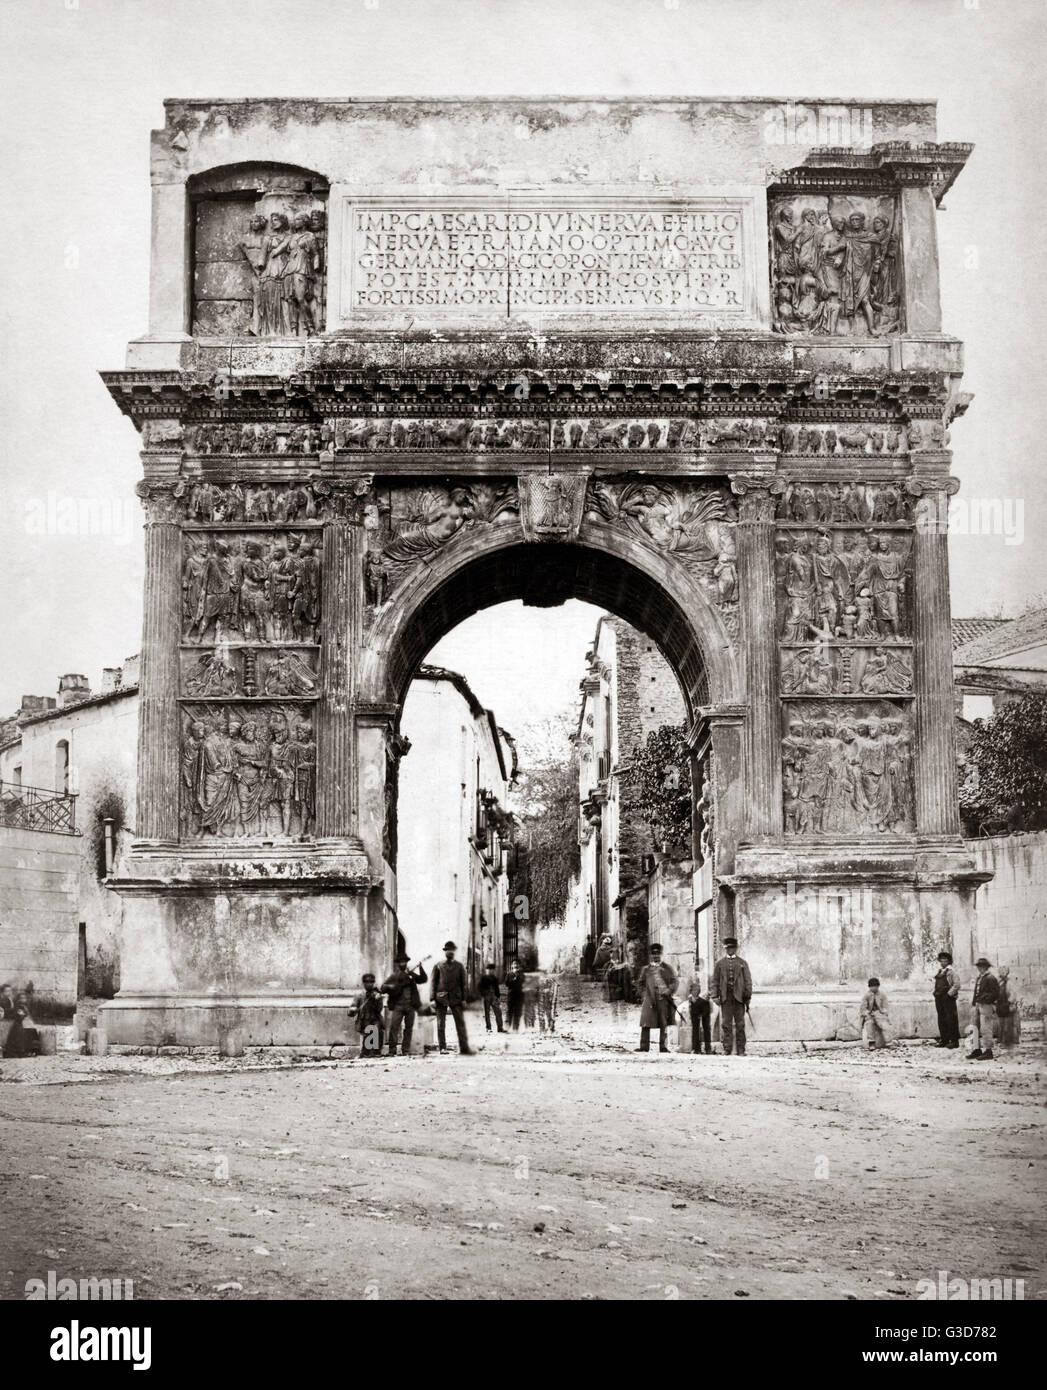 The Arch of Trajan, Benevento, near Naples, Itlay, circa 1870s. Date ...